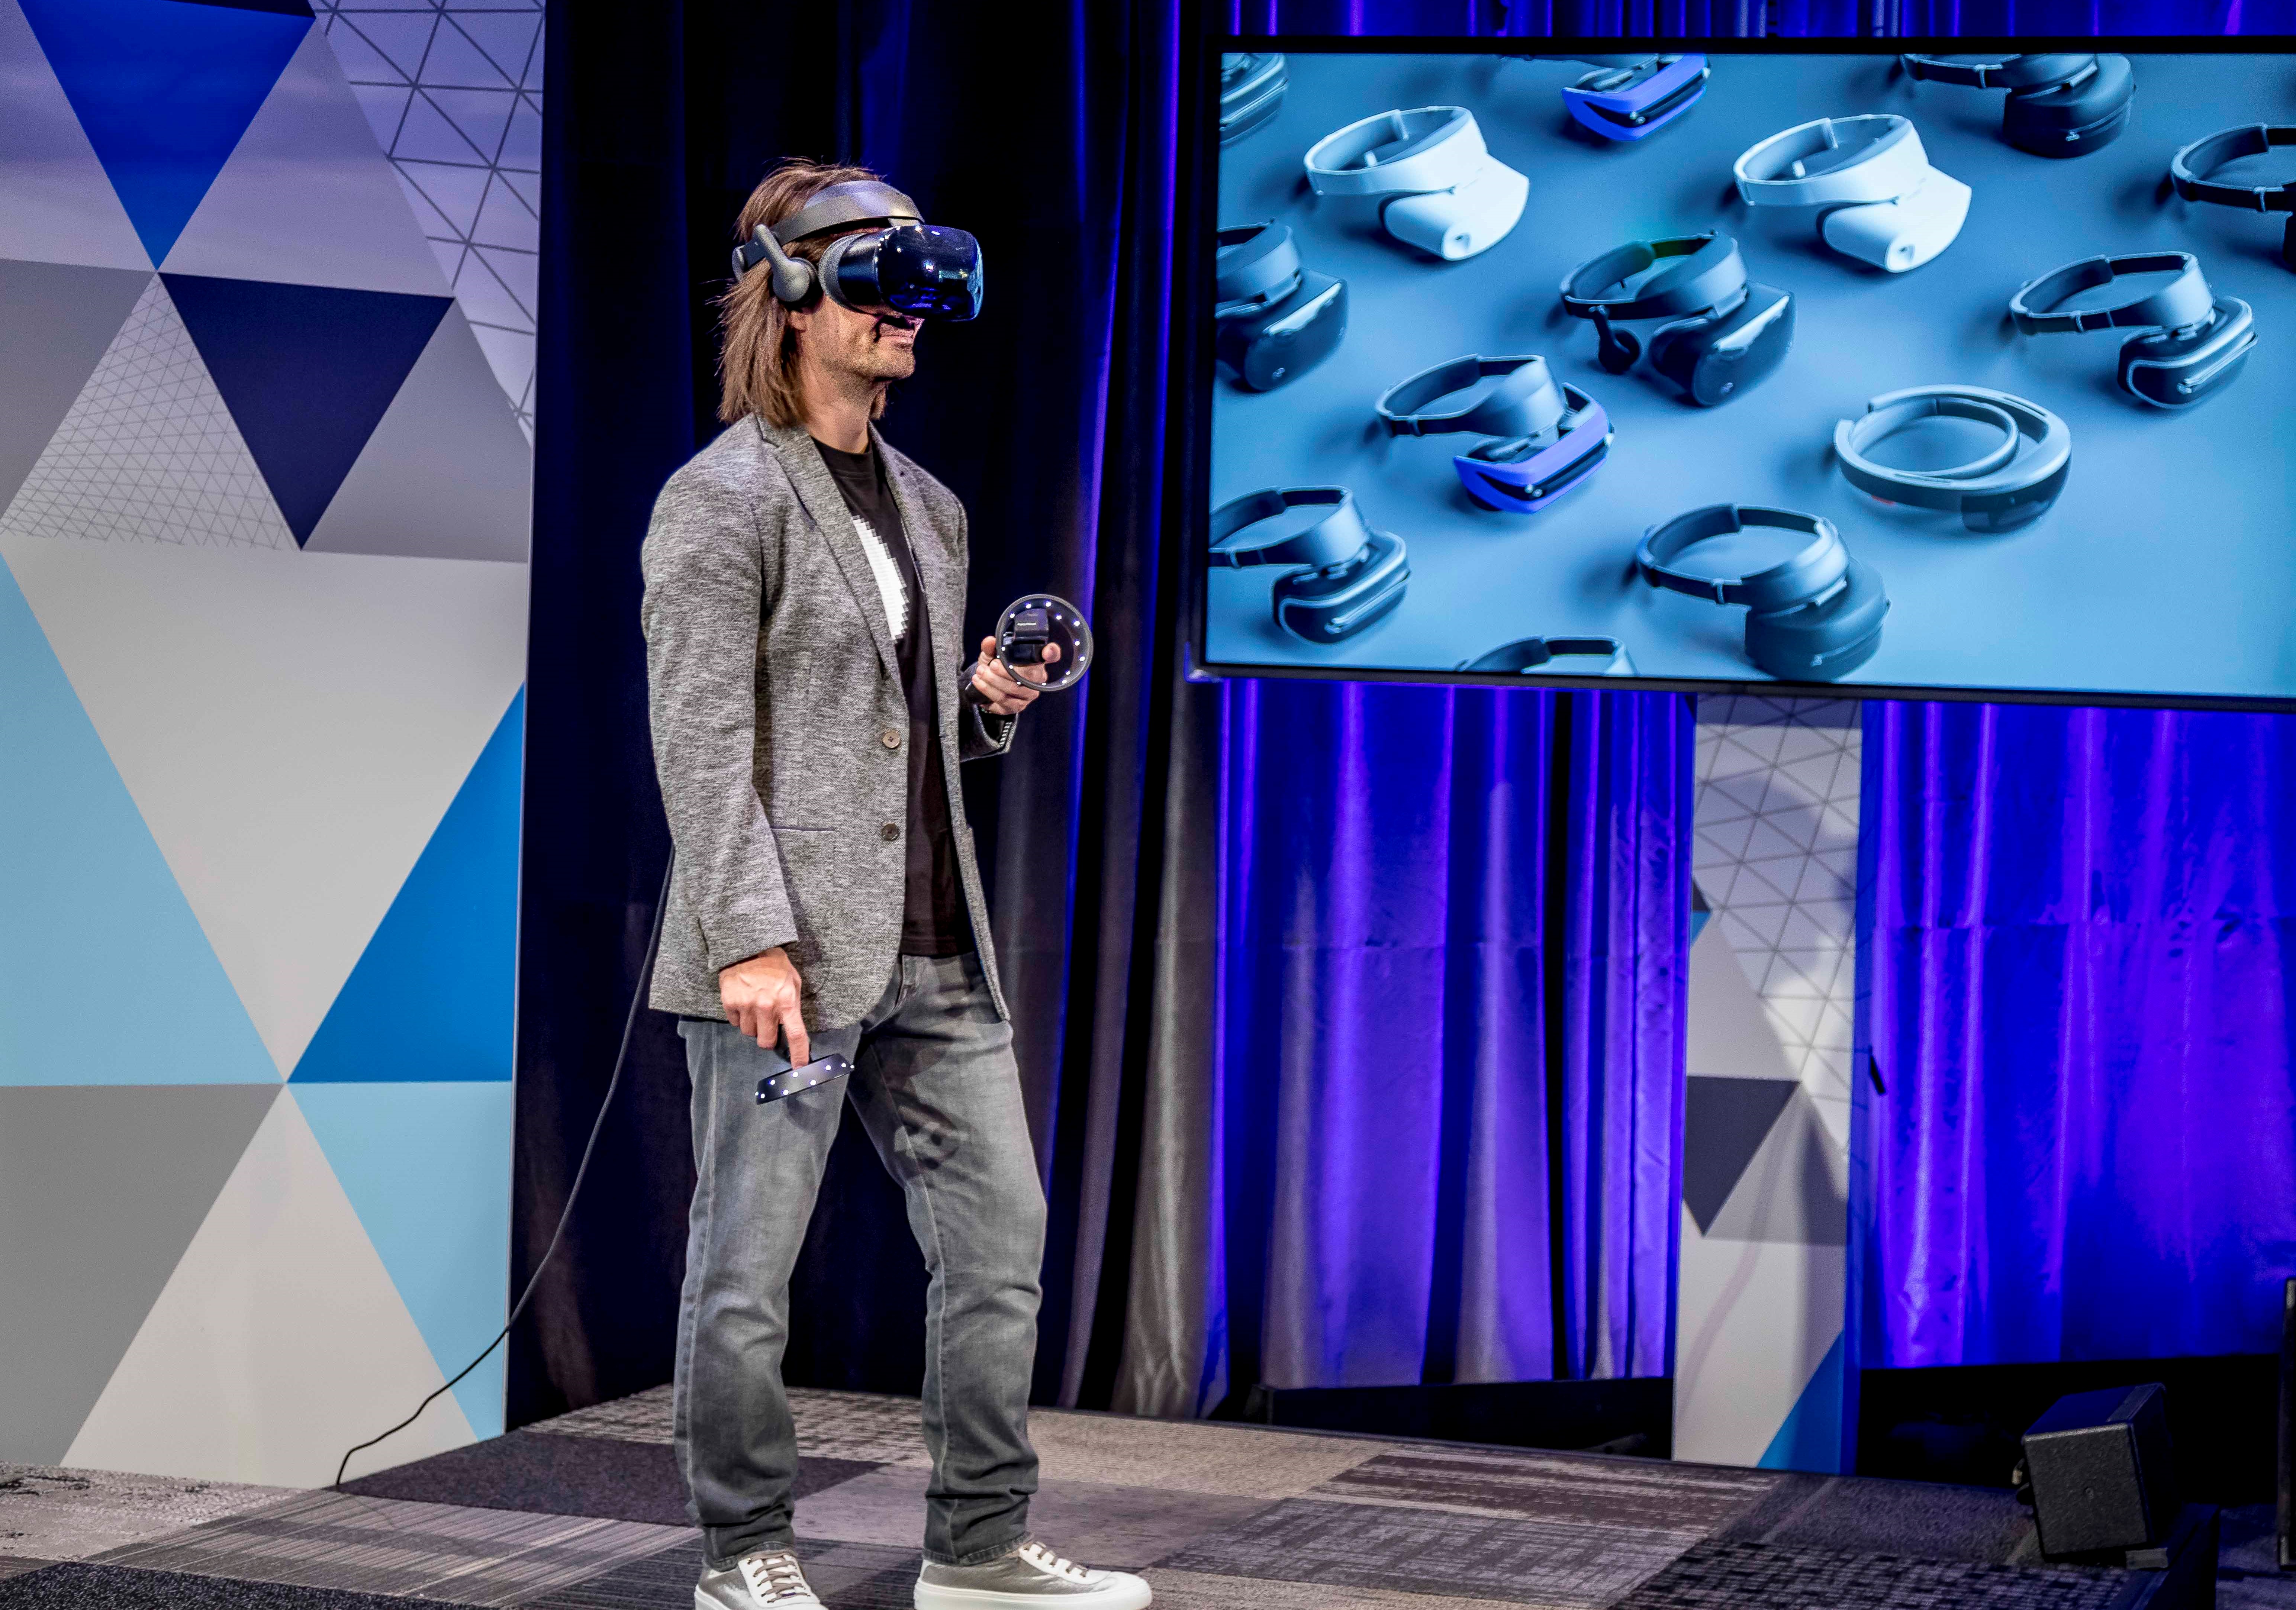 Alex Kipman standing on stage wearing the Samsung HMD Odyssey and holding motion controllers.